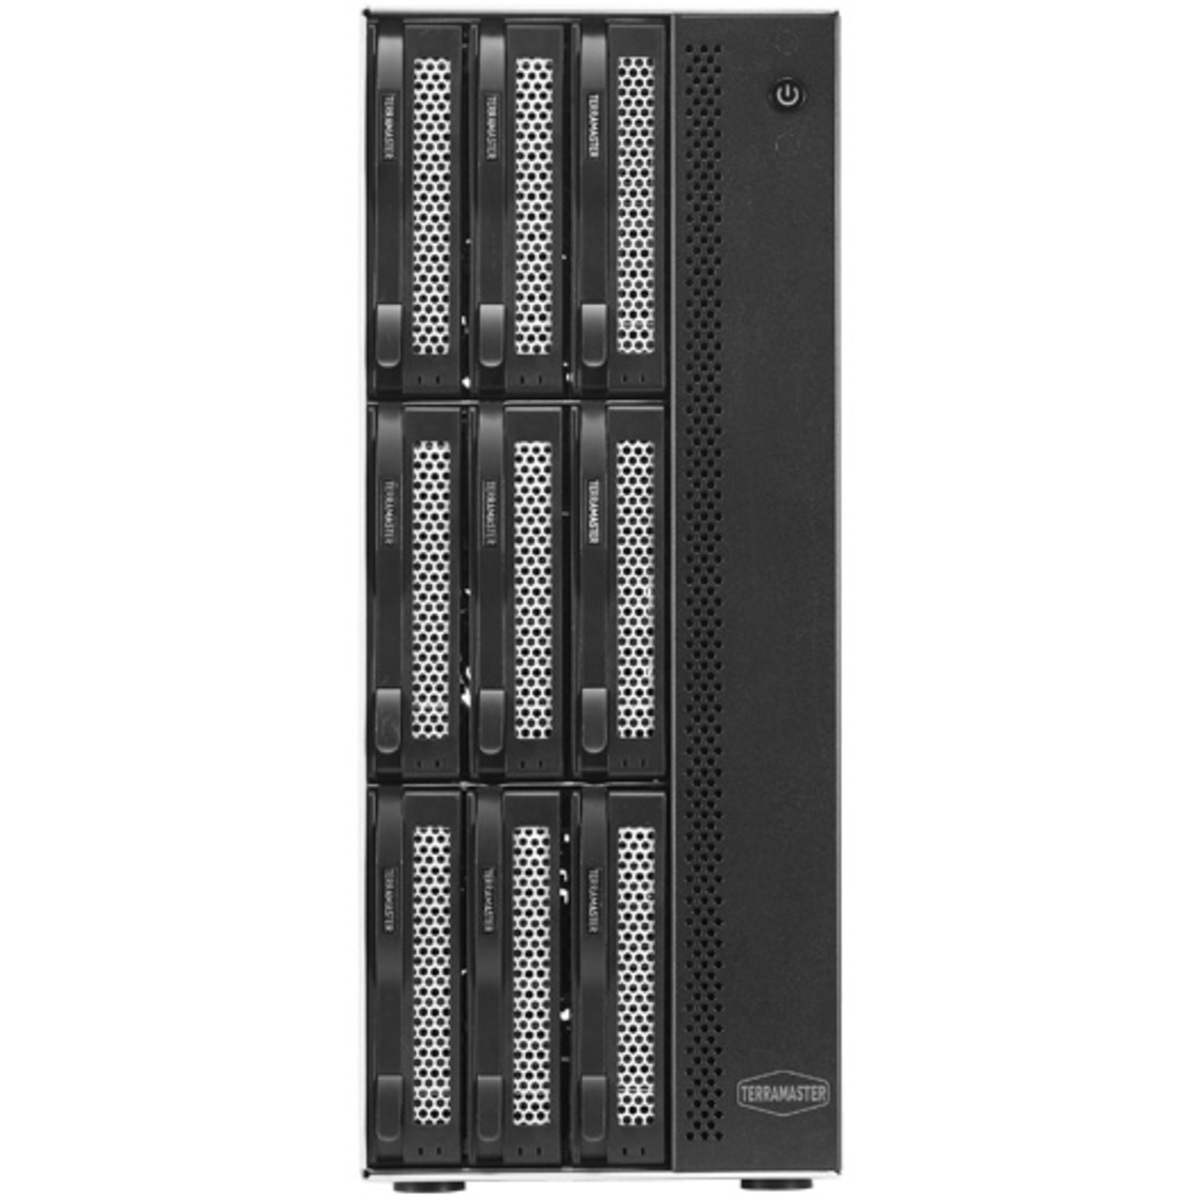 TerraMaster T9-423 Desktop 9-Bay Multimedia / Power User / Business NAS - Network Attached Storage Device Burn-In Tested Configurations T9-423